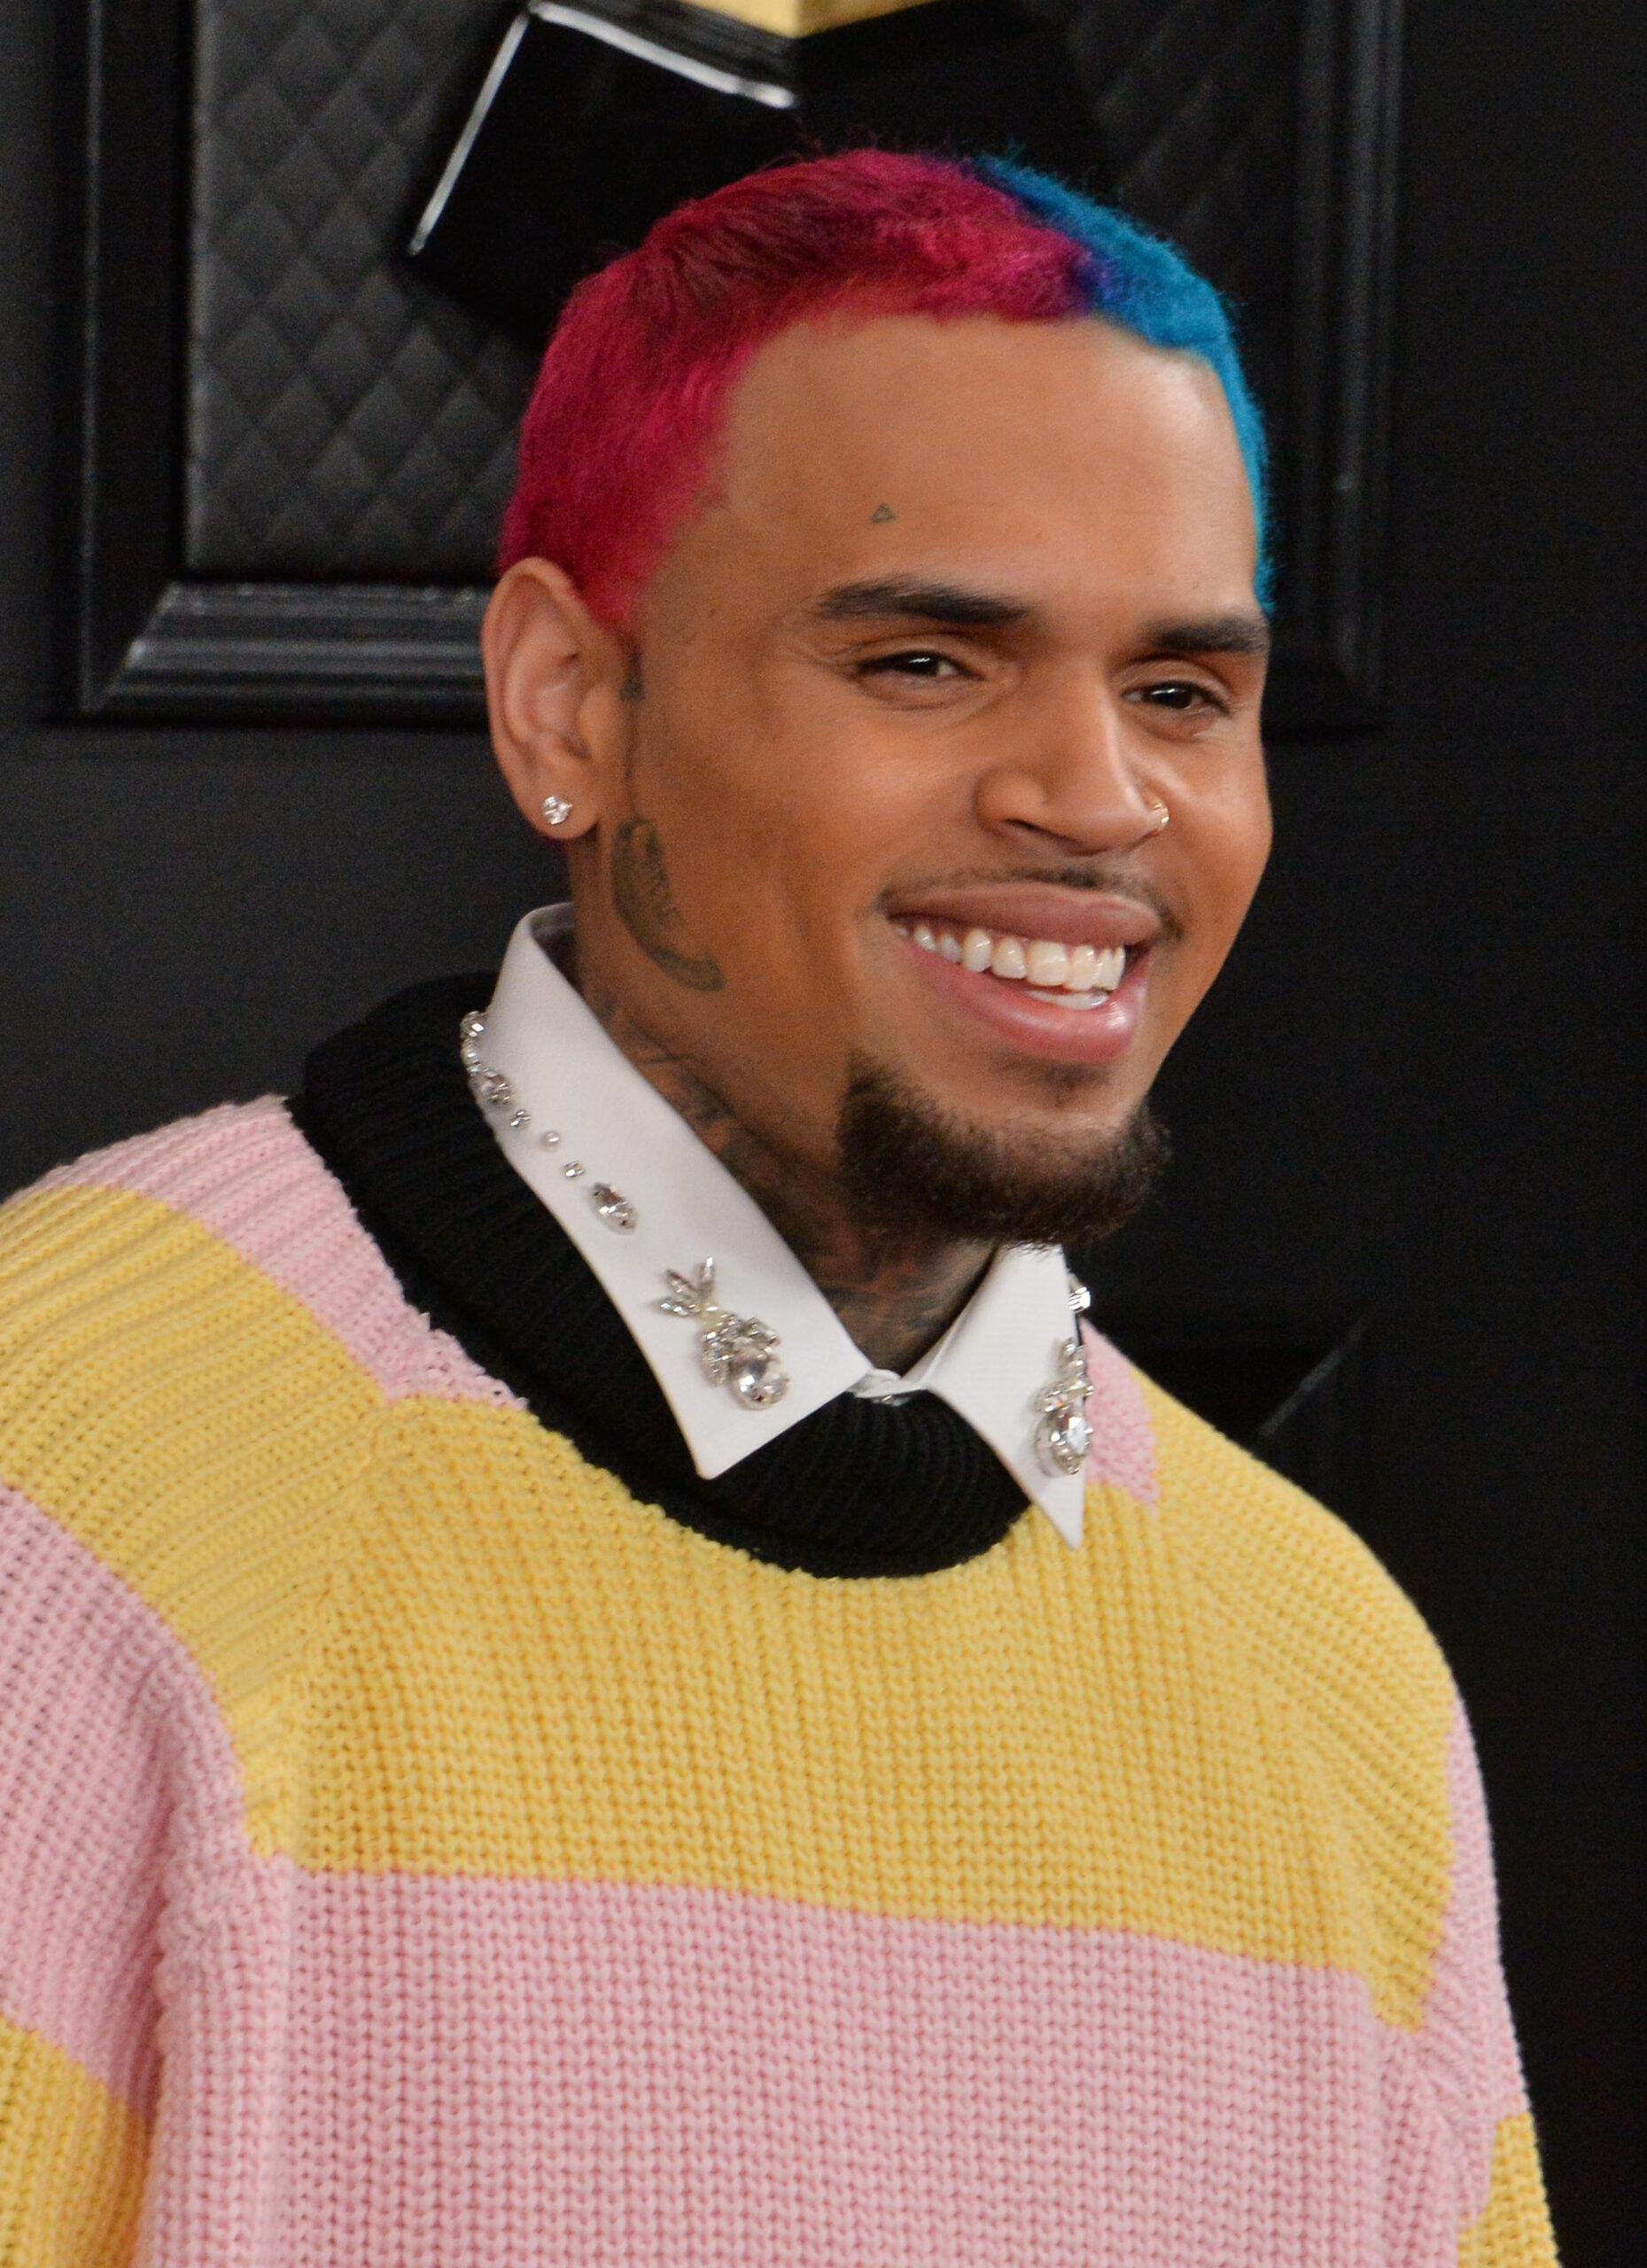 Chris Brown arrives for the 62nd annual Grammy Awards in Los Angeles